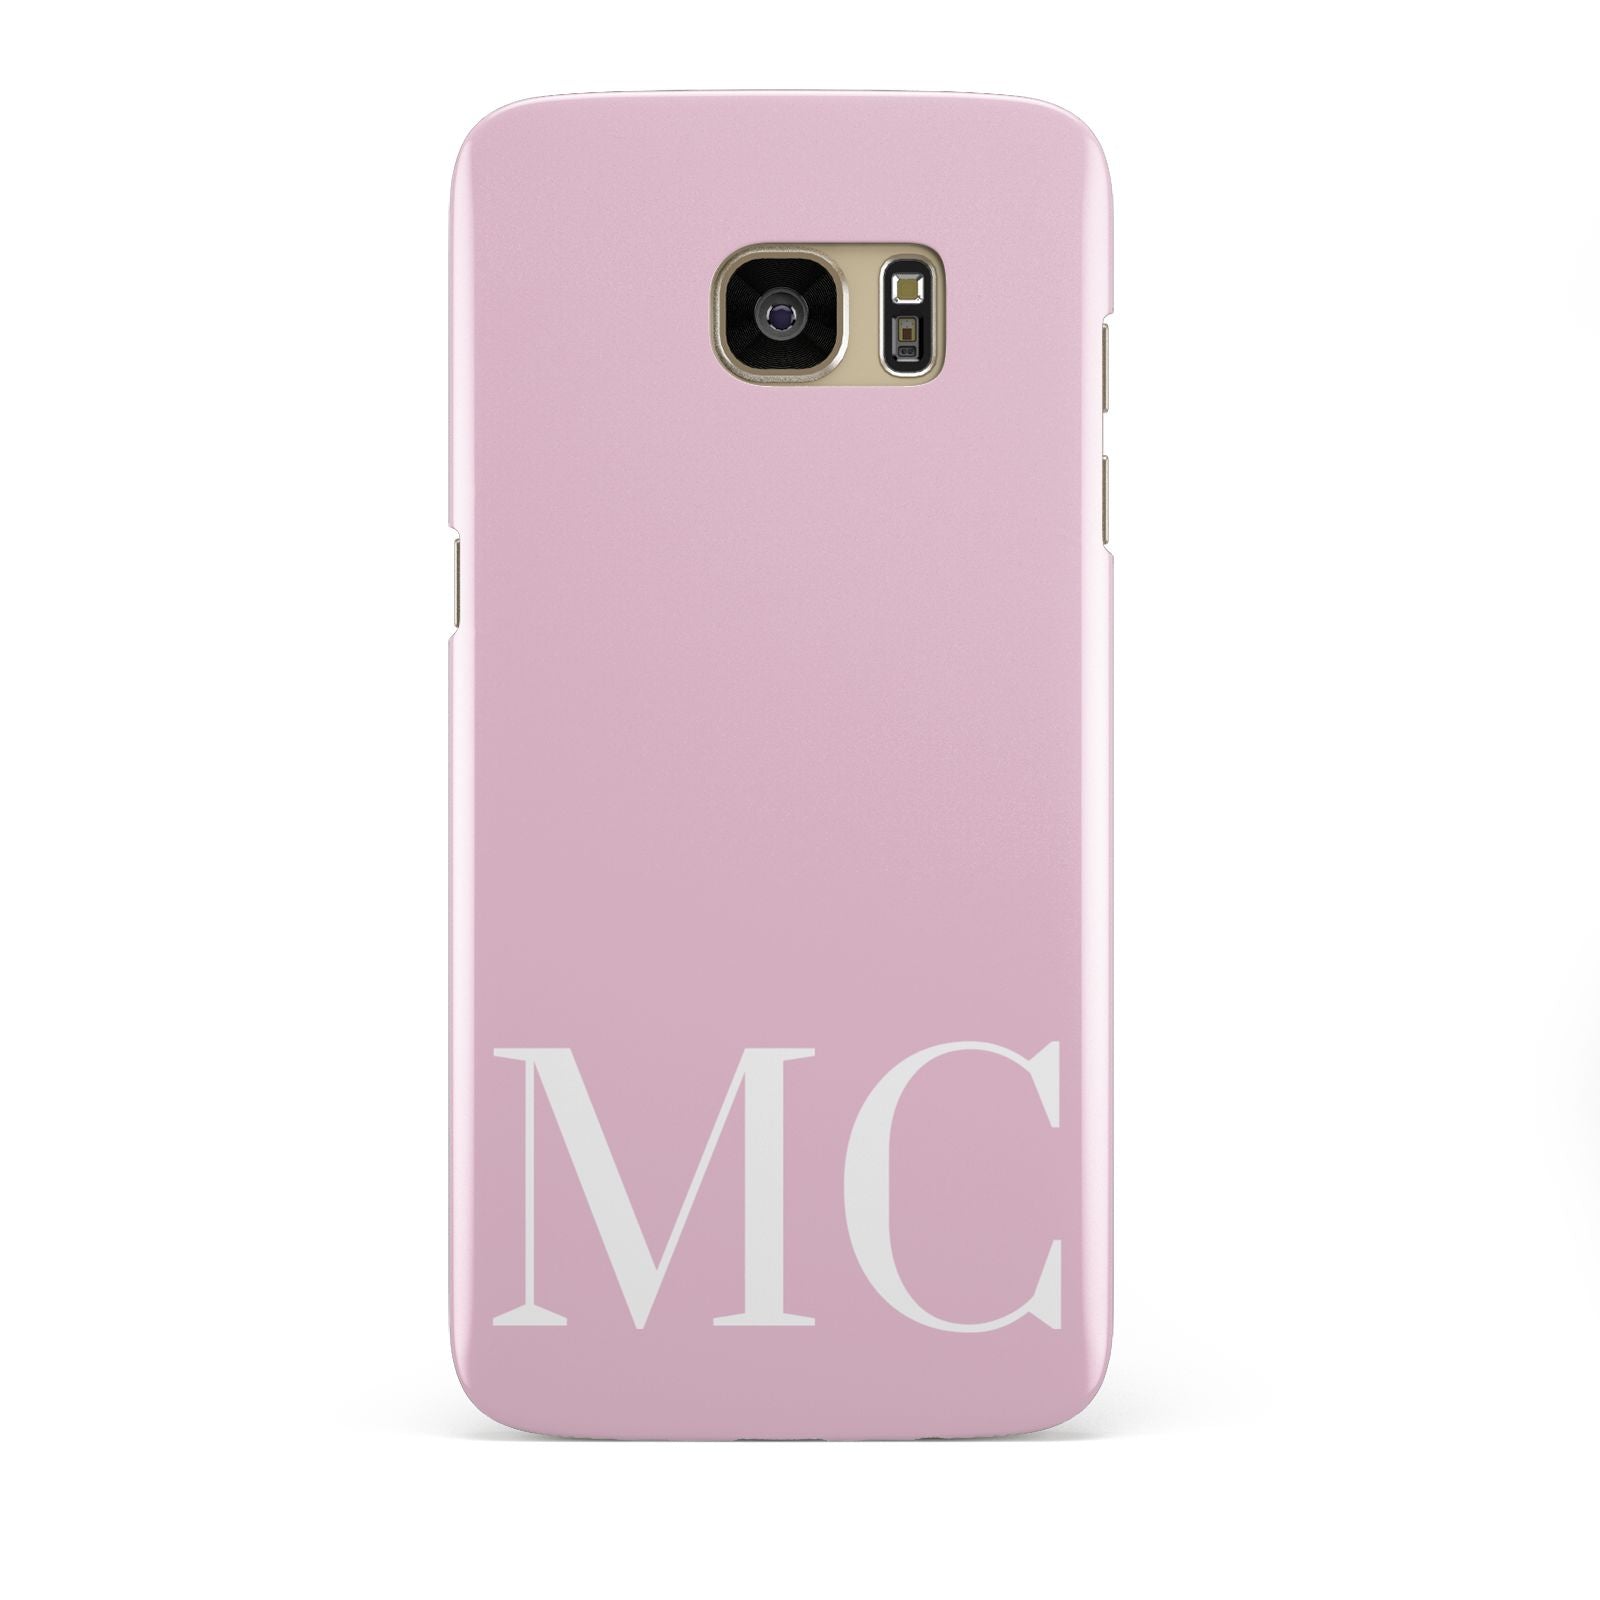 Initials Personalised 2 Samsung Galaxy S7 Edge Case